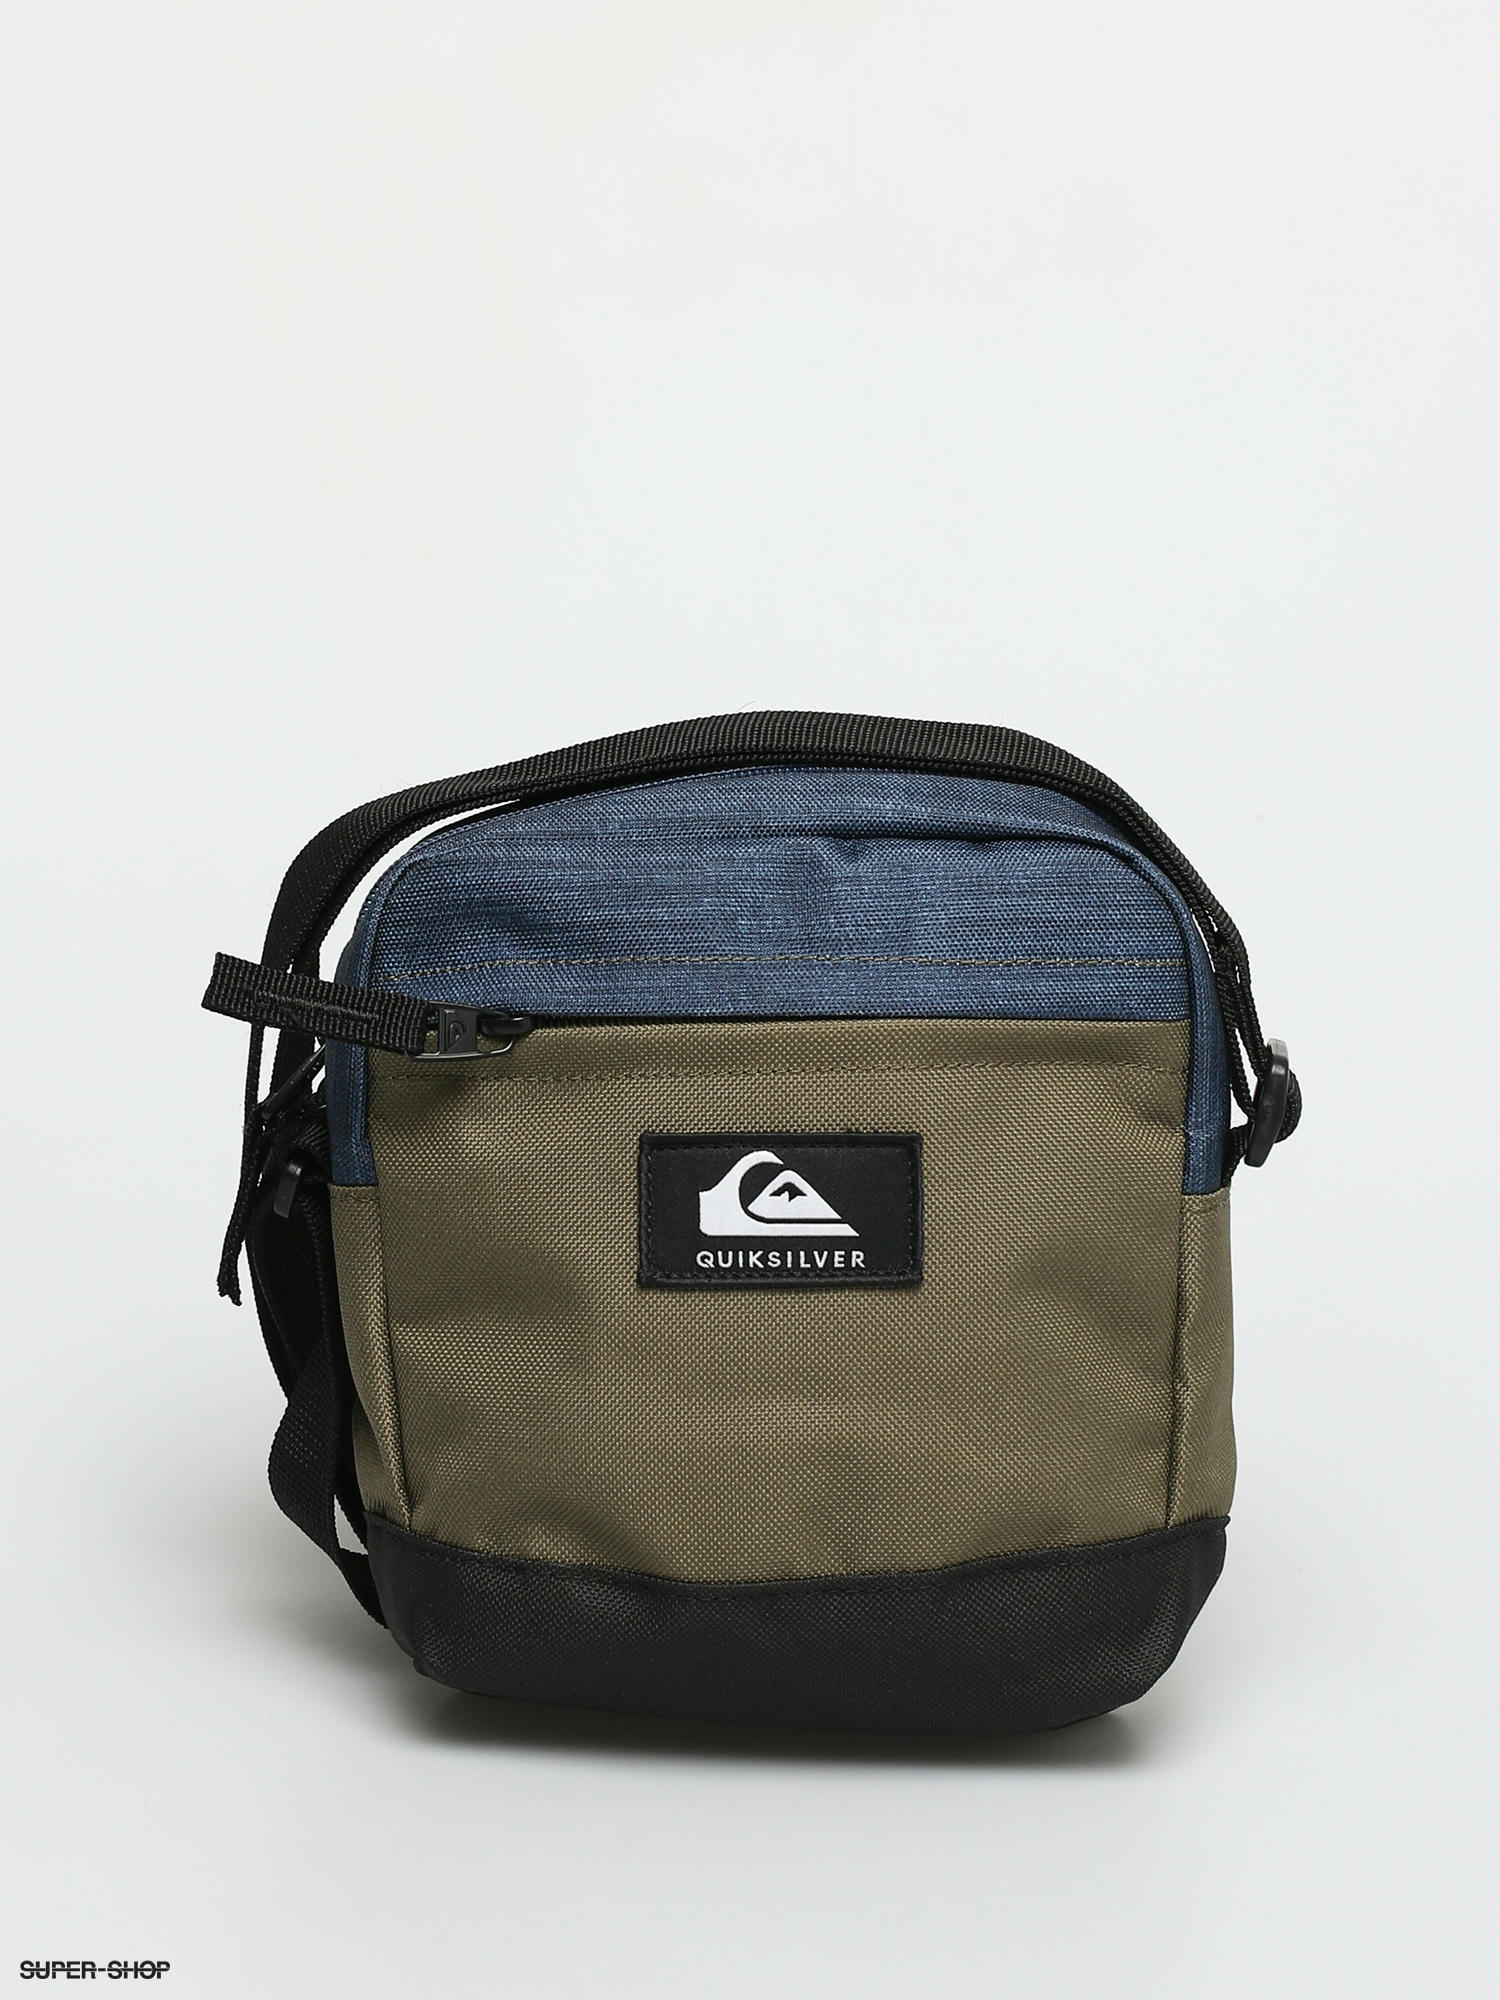 Quiksilver Magicall Tasche (burnt olive)